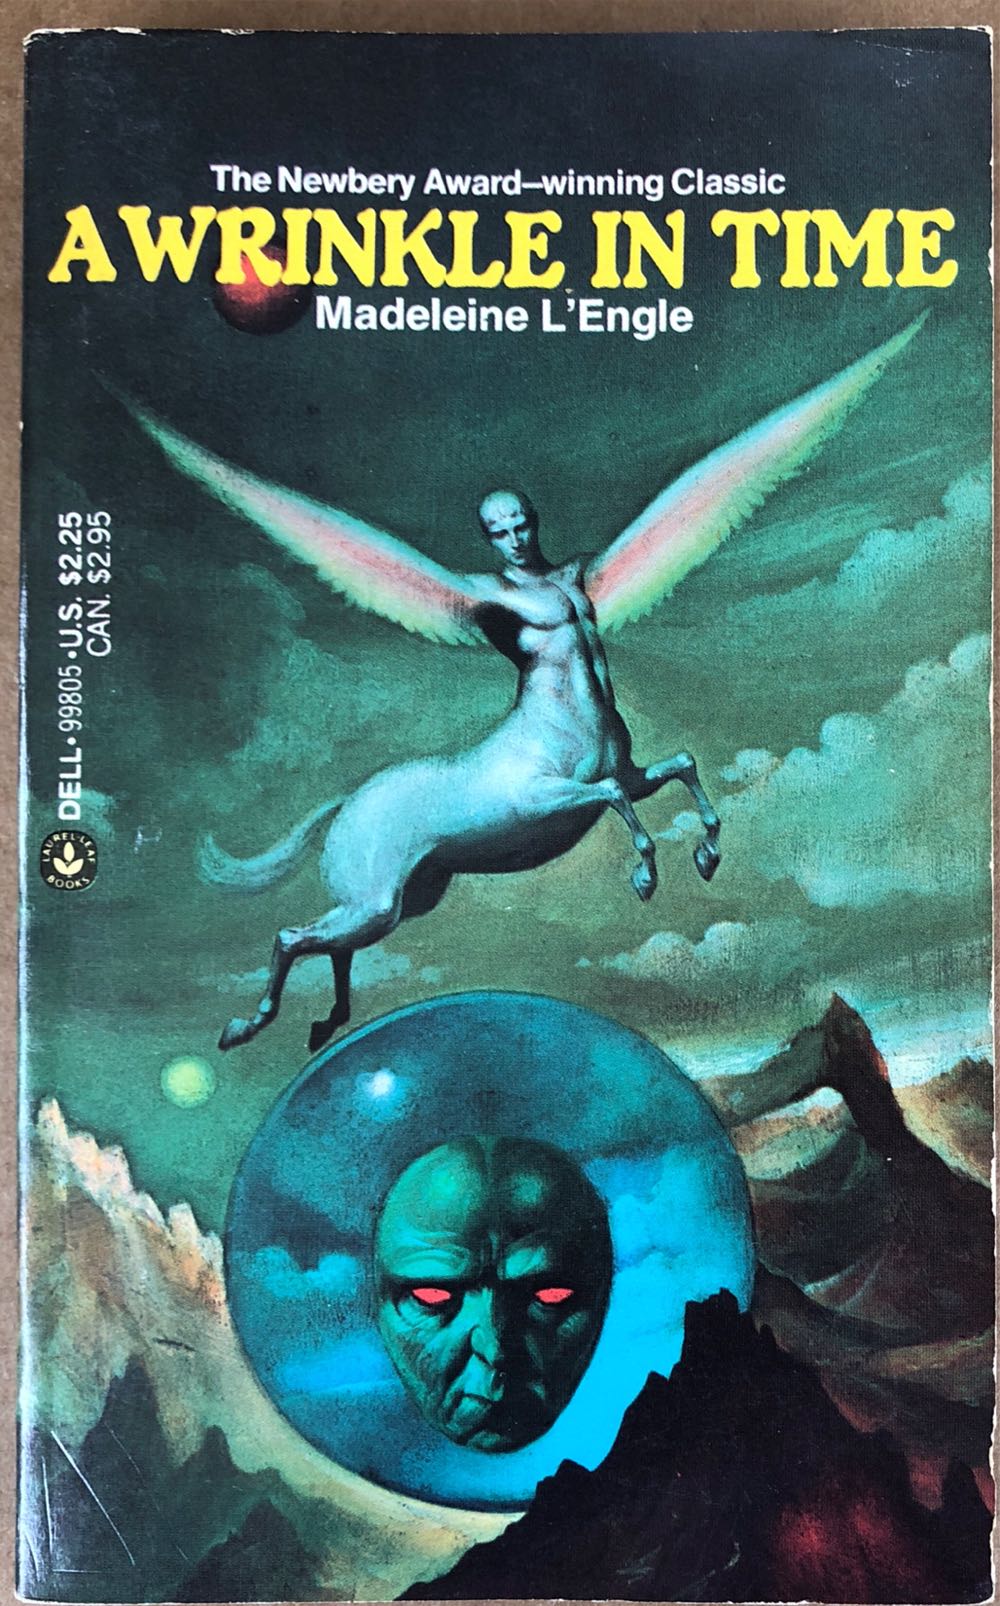 A Wrinkle In Time - Madeleine L’Engle (Dell - Paperback) book collectible [Barcode 9780440998051] - Main Image 3